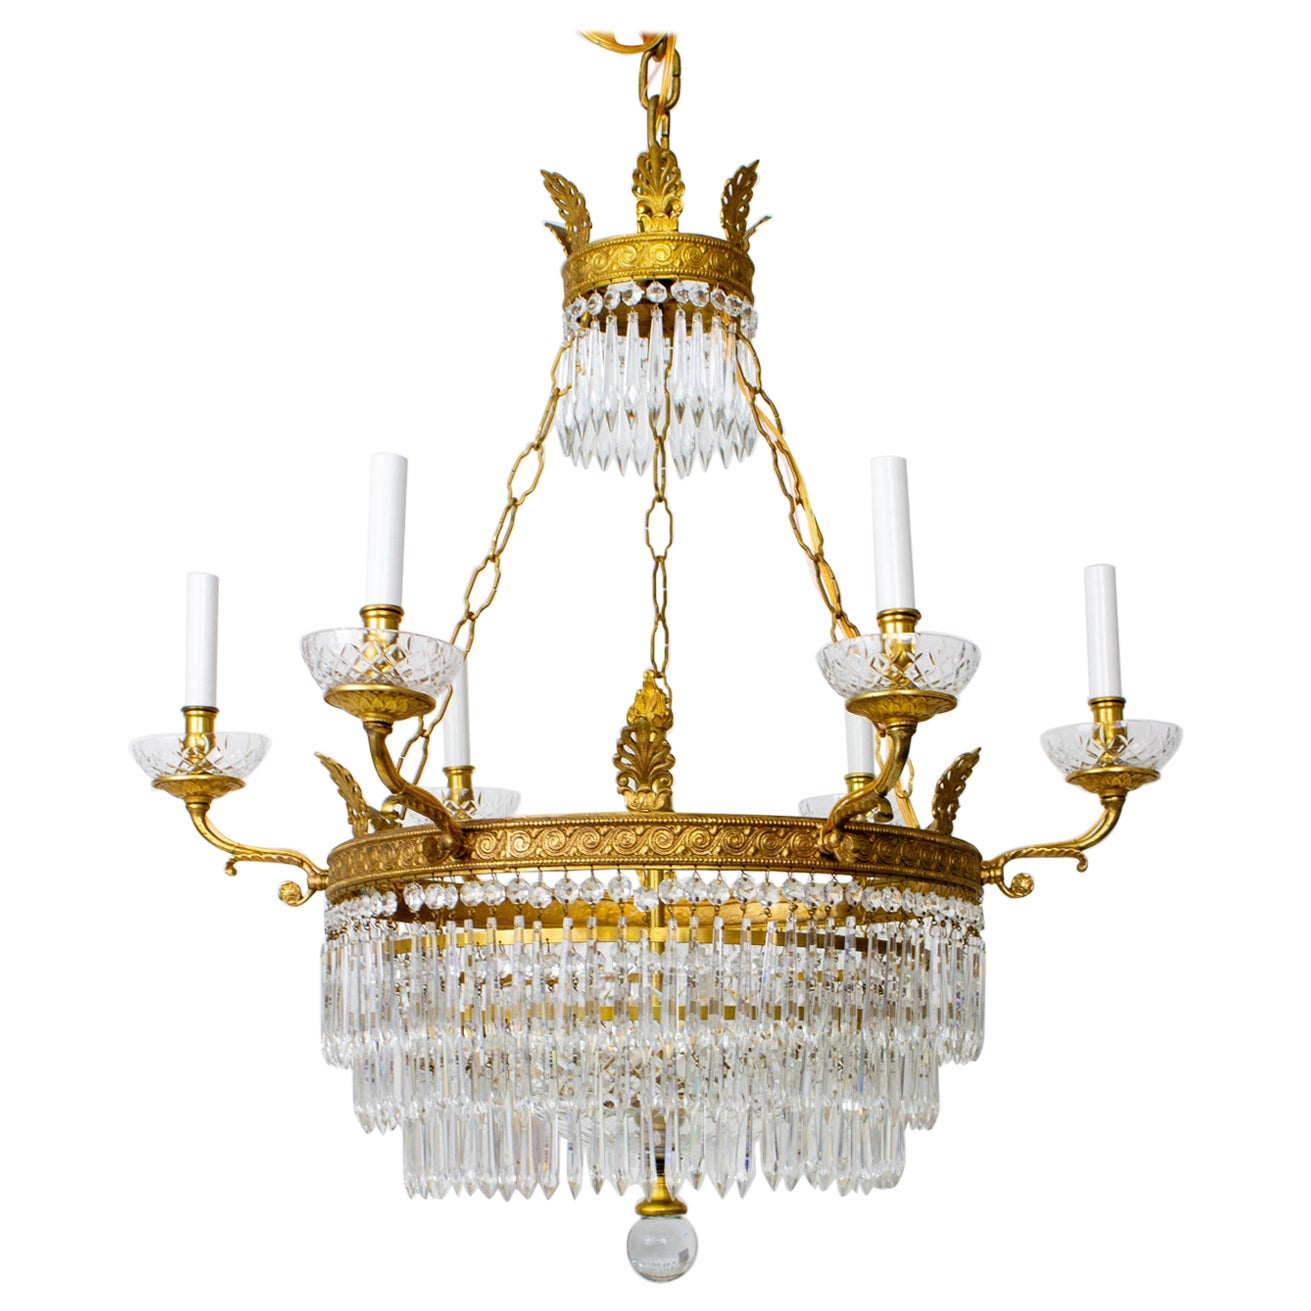 Six Arm Brass and Crystal Empire style Chandelier